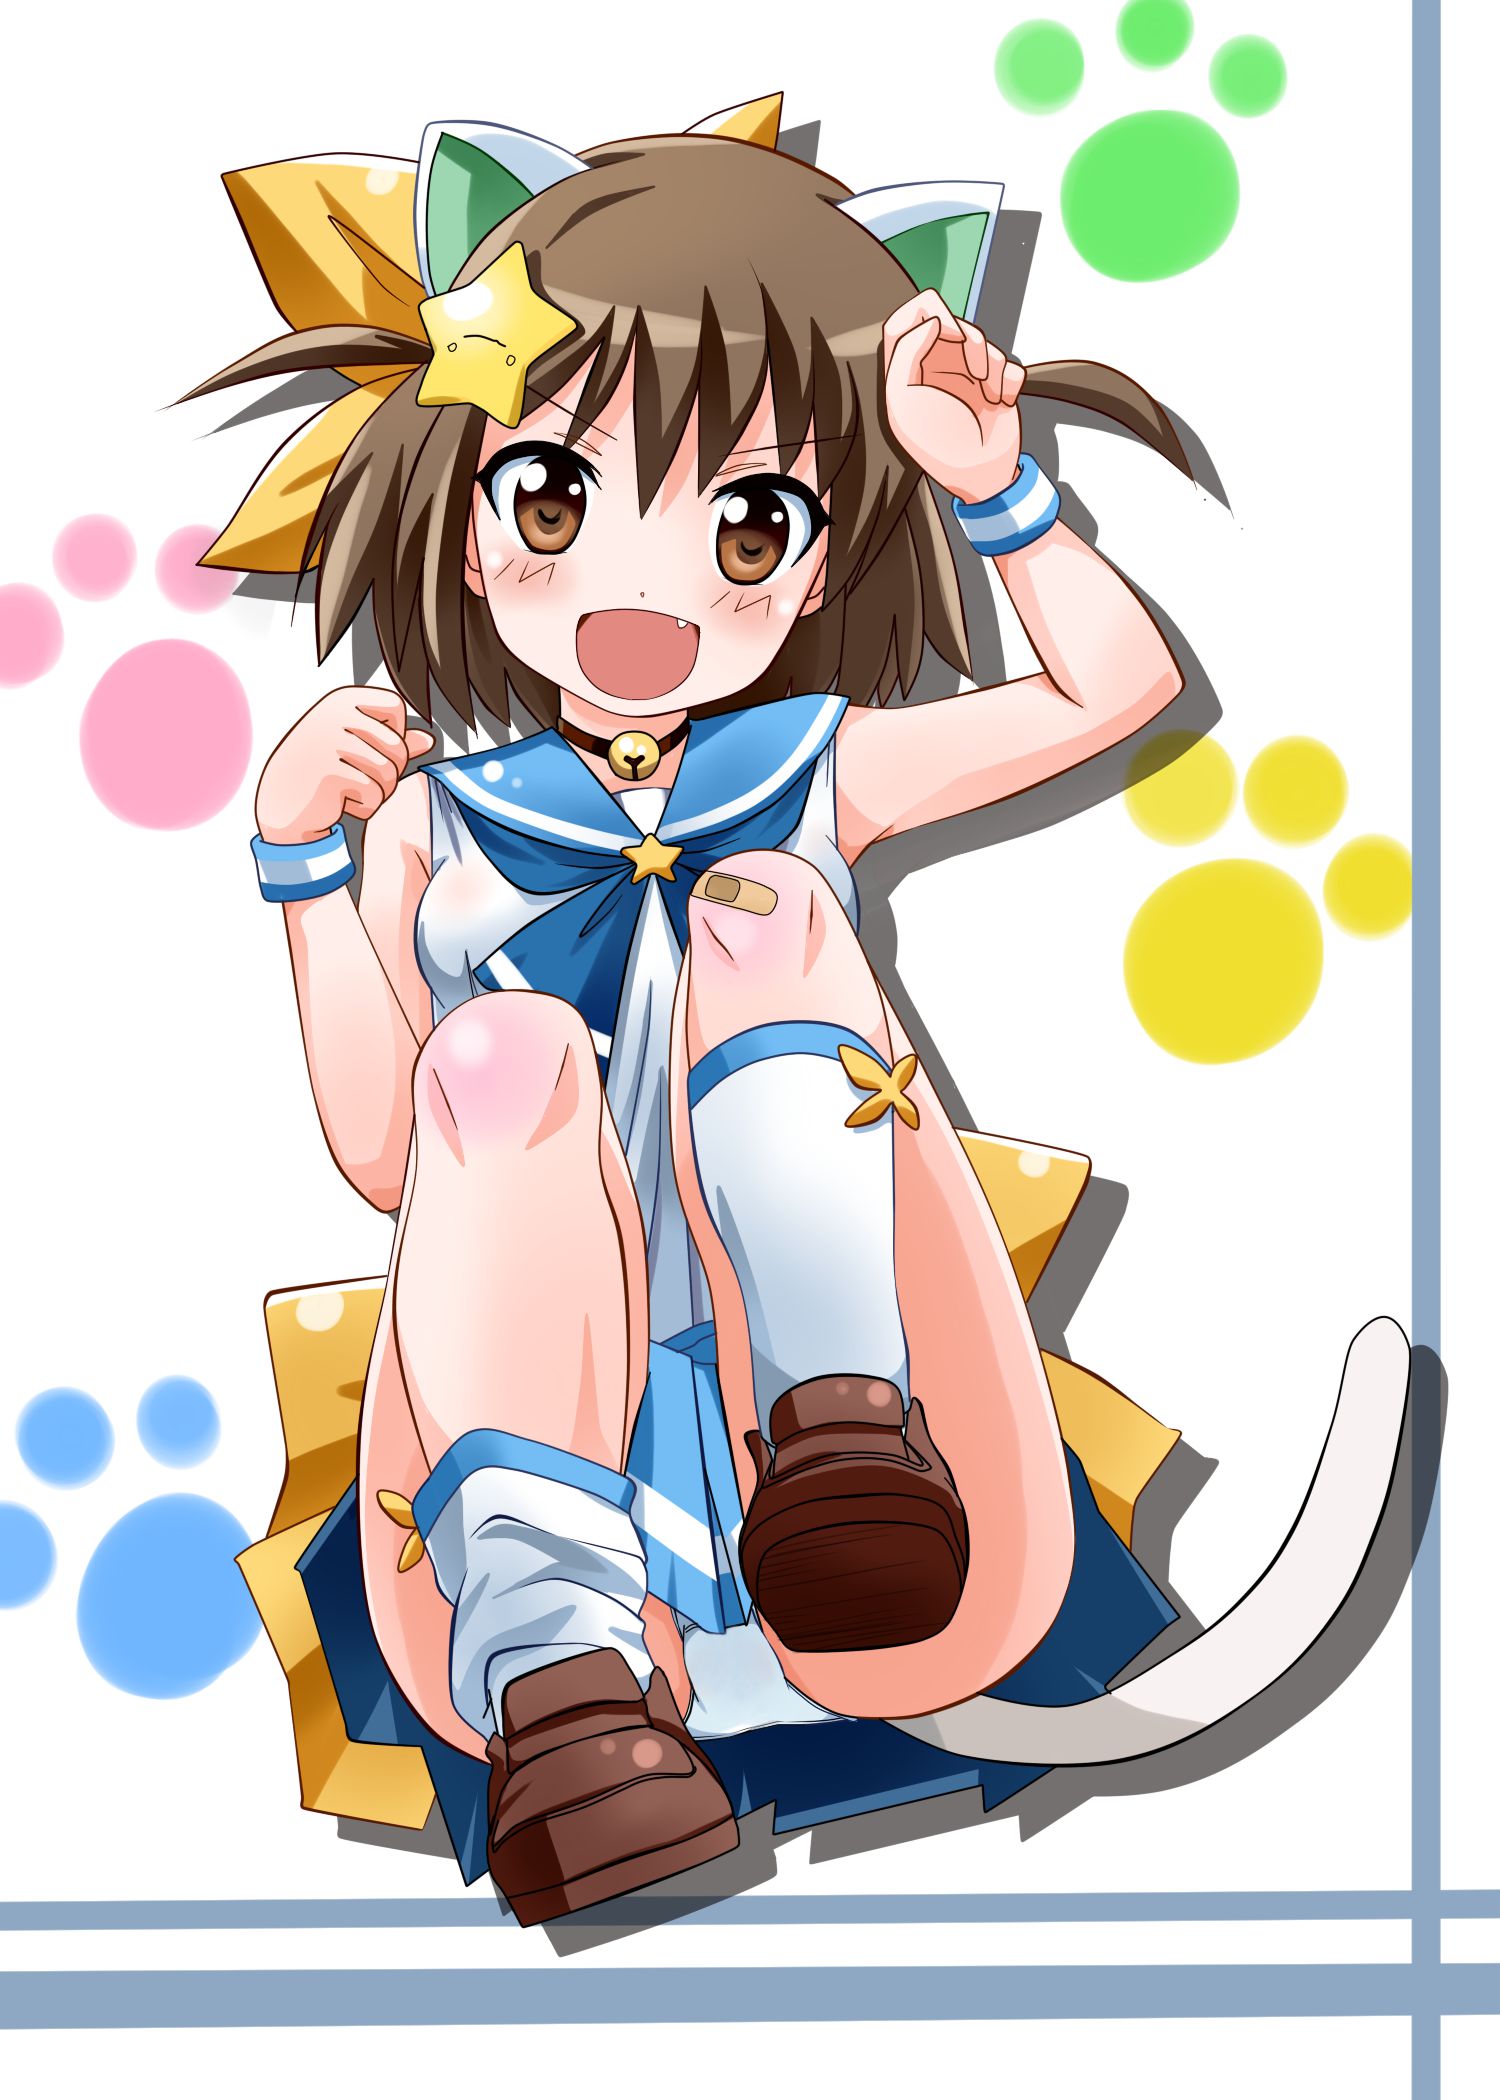 [Nya-Tan (Etotama)] February 22nd is a cat day, so I tried to collect the fine loliello image of the cat daughter Nya-tan of Etotama! 36